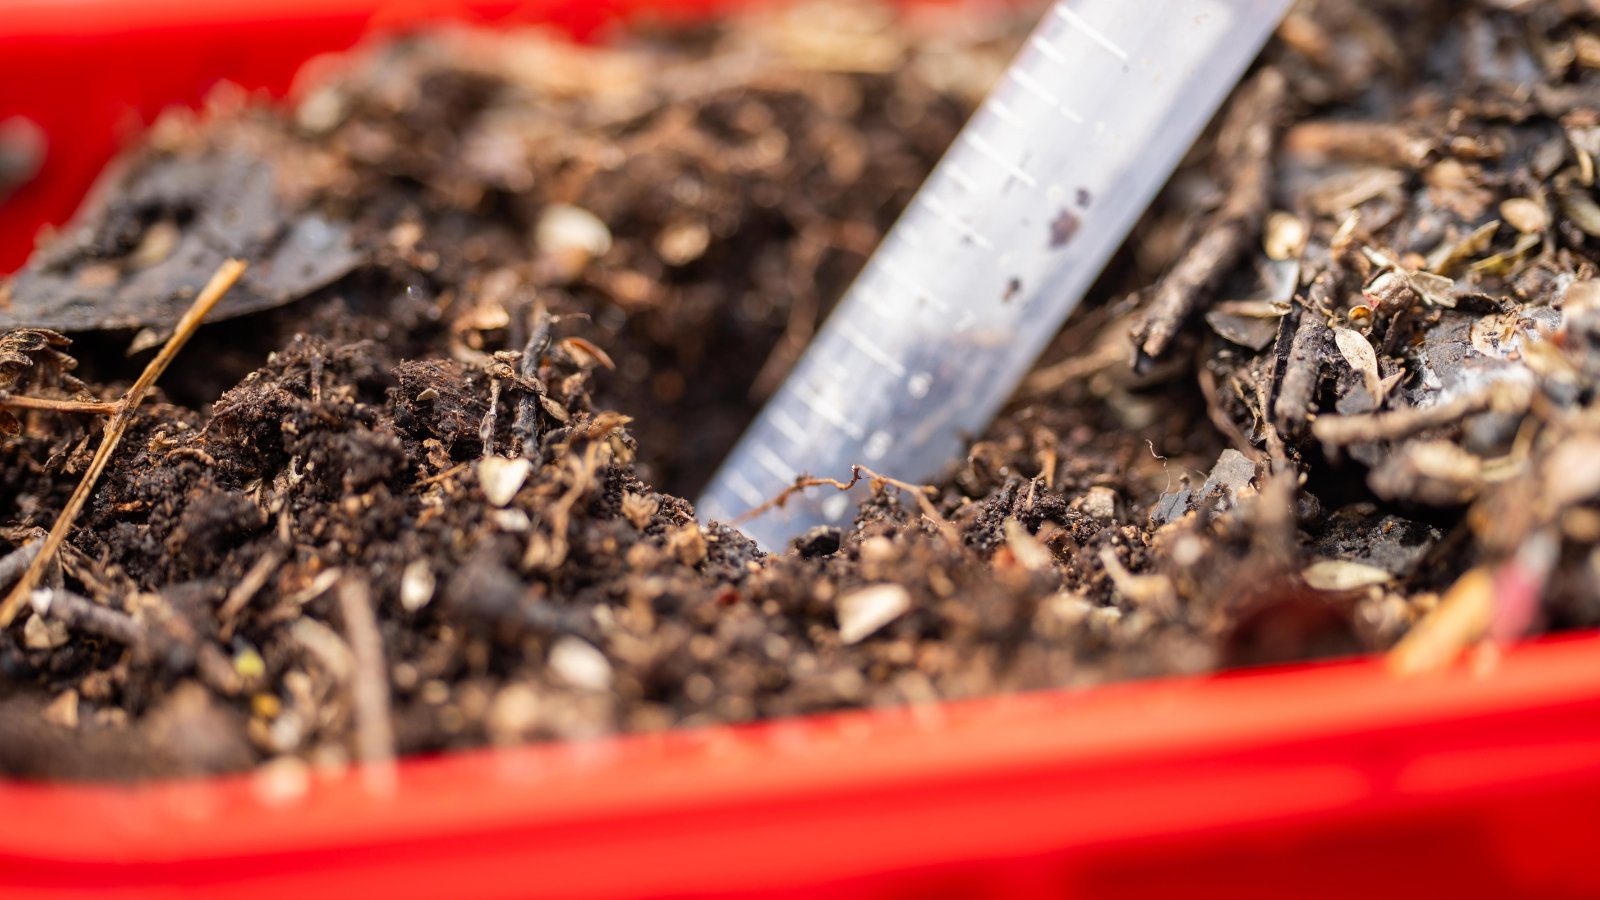 A close-up of a test tube nestled in soil within a red pot, indicating soil testing underway, with scientific precision and organic context merged seamlessly in this vibrant composition.